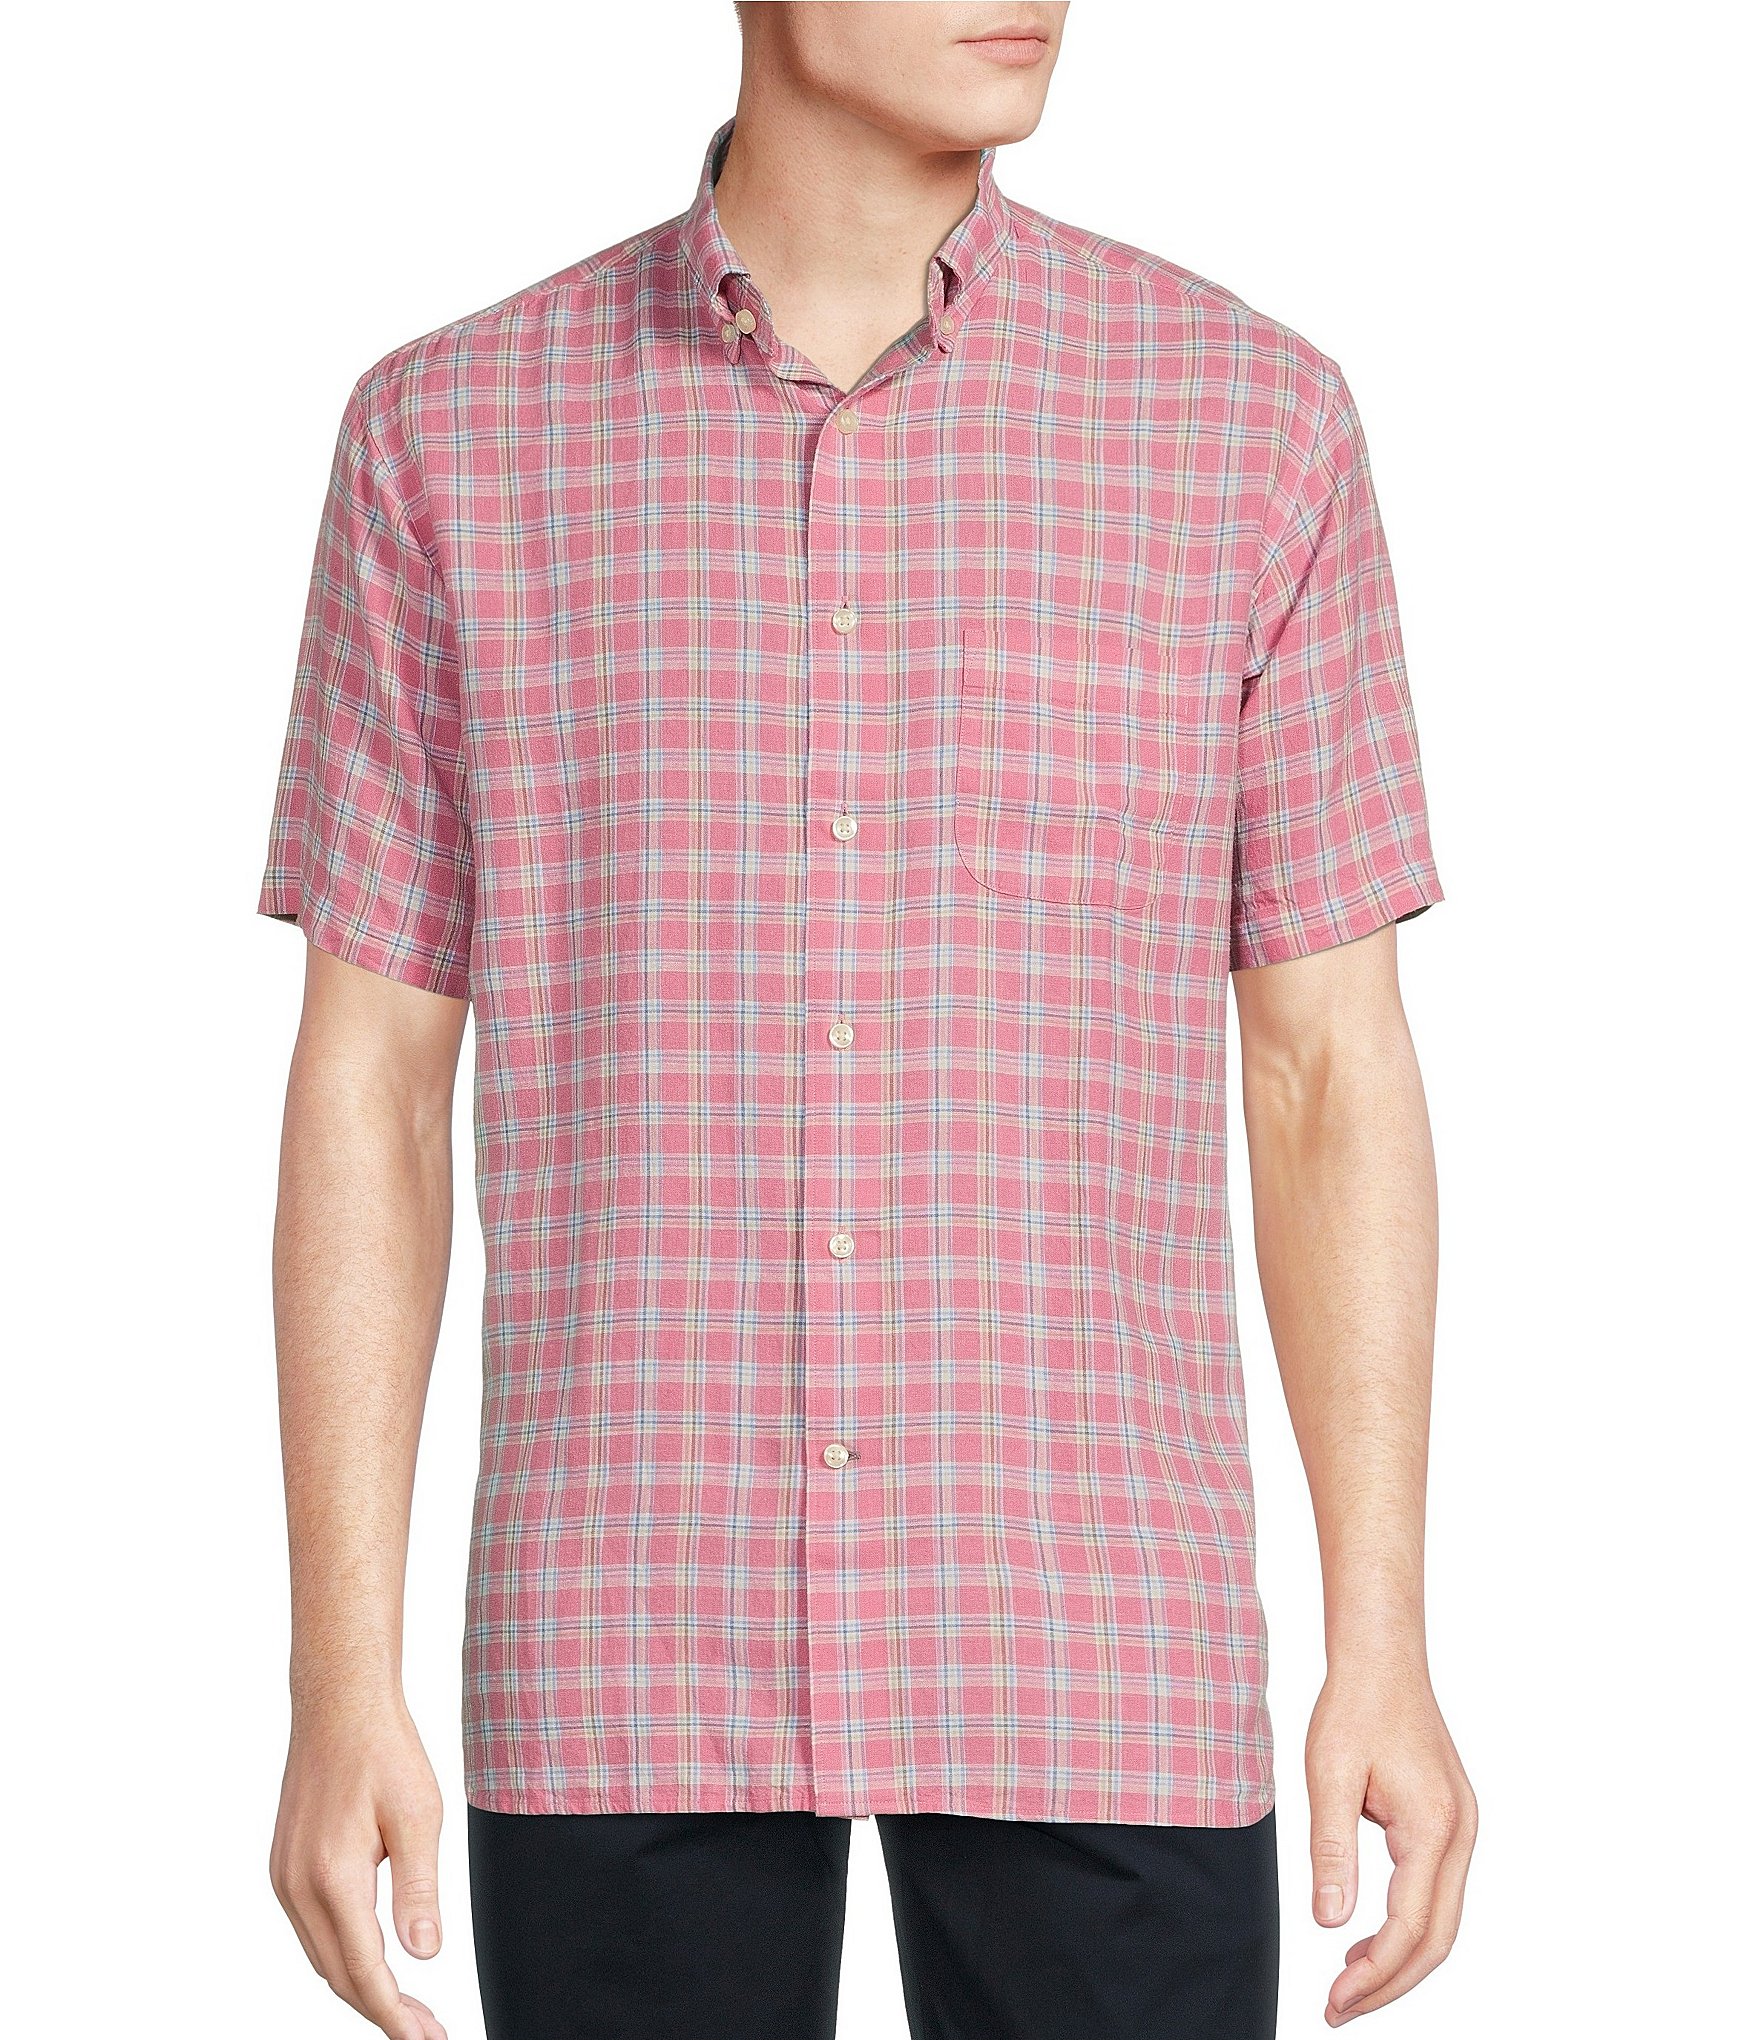 Sale & Clearance Pink Men's Shirts